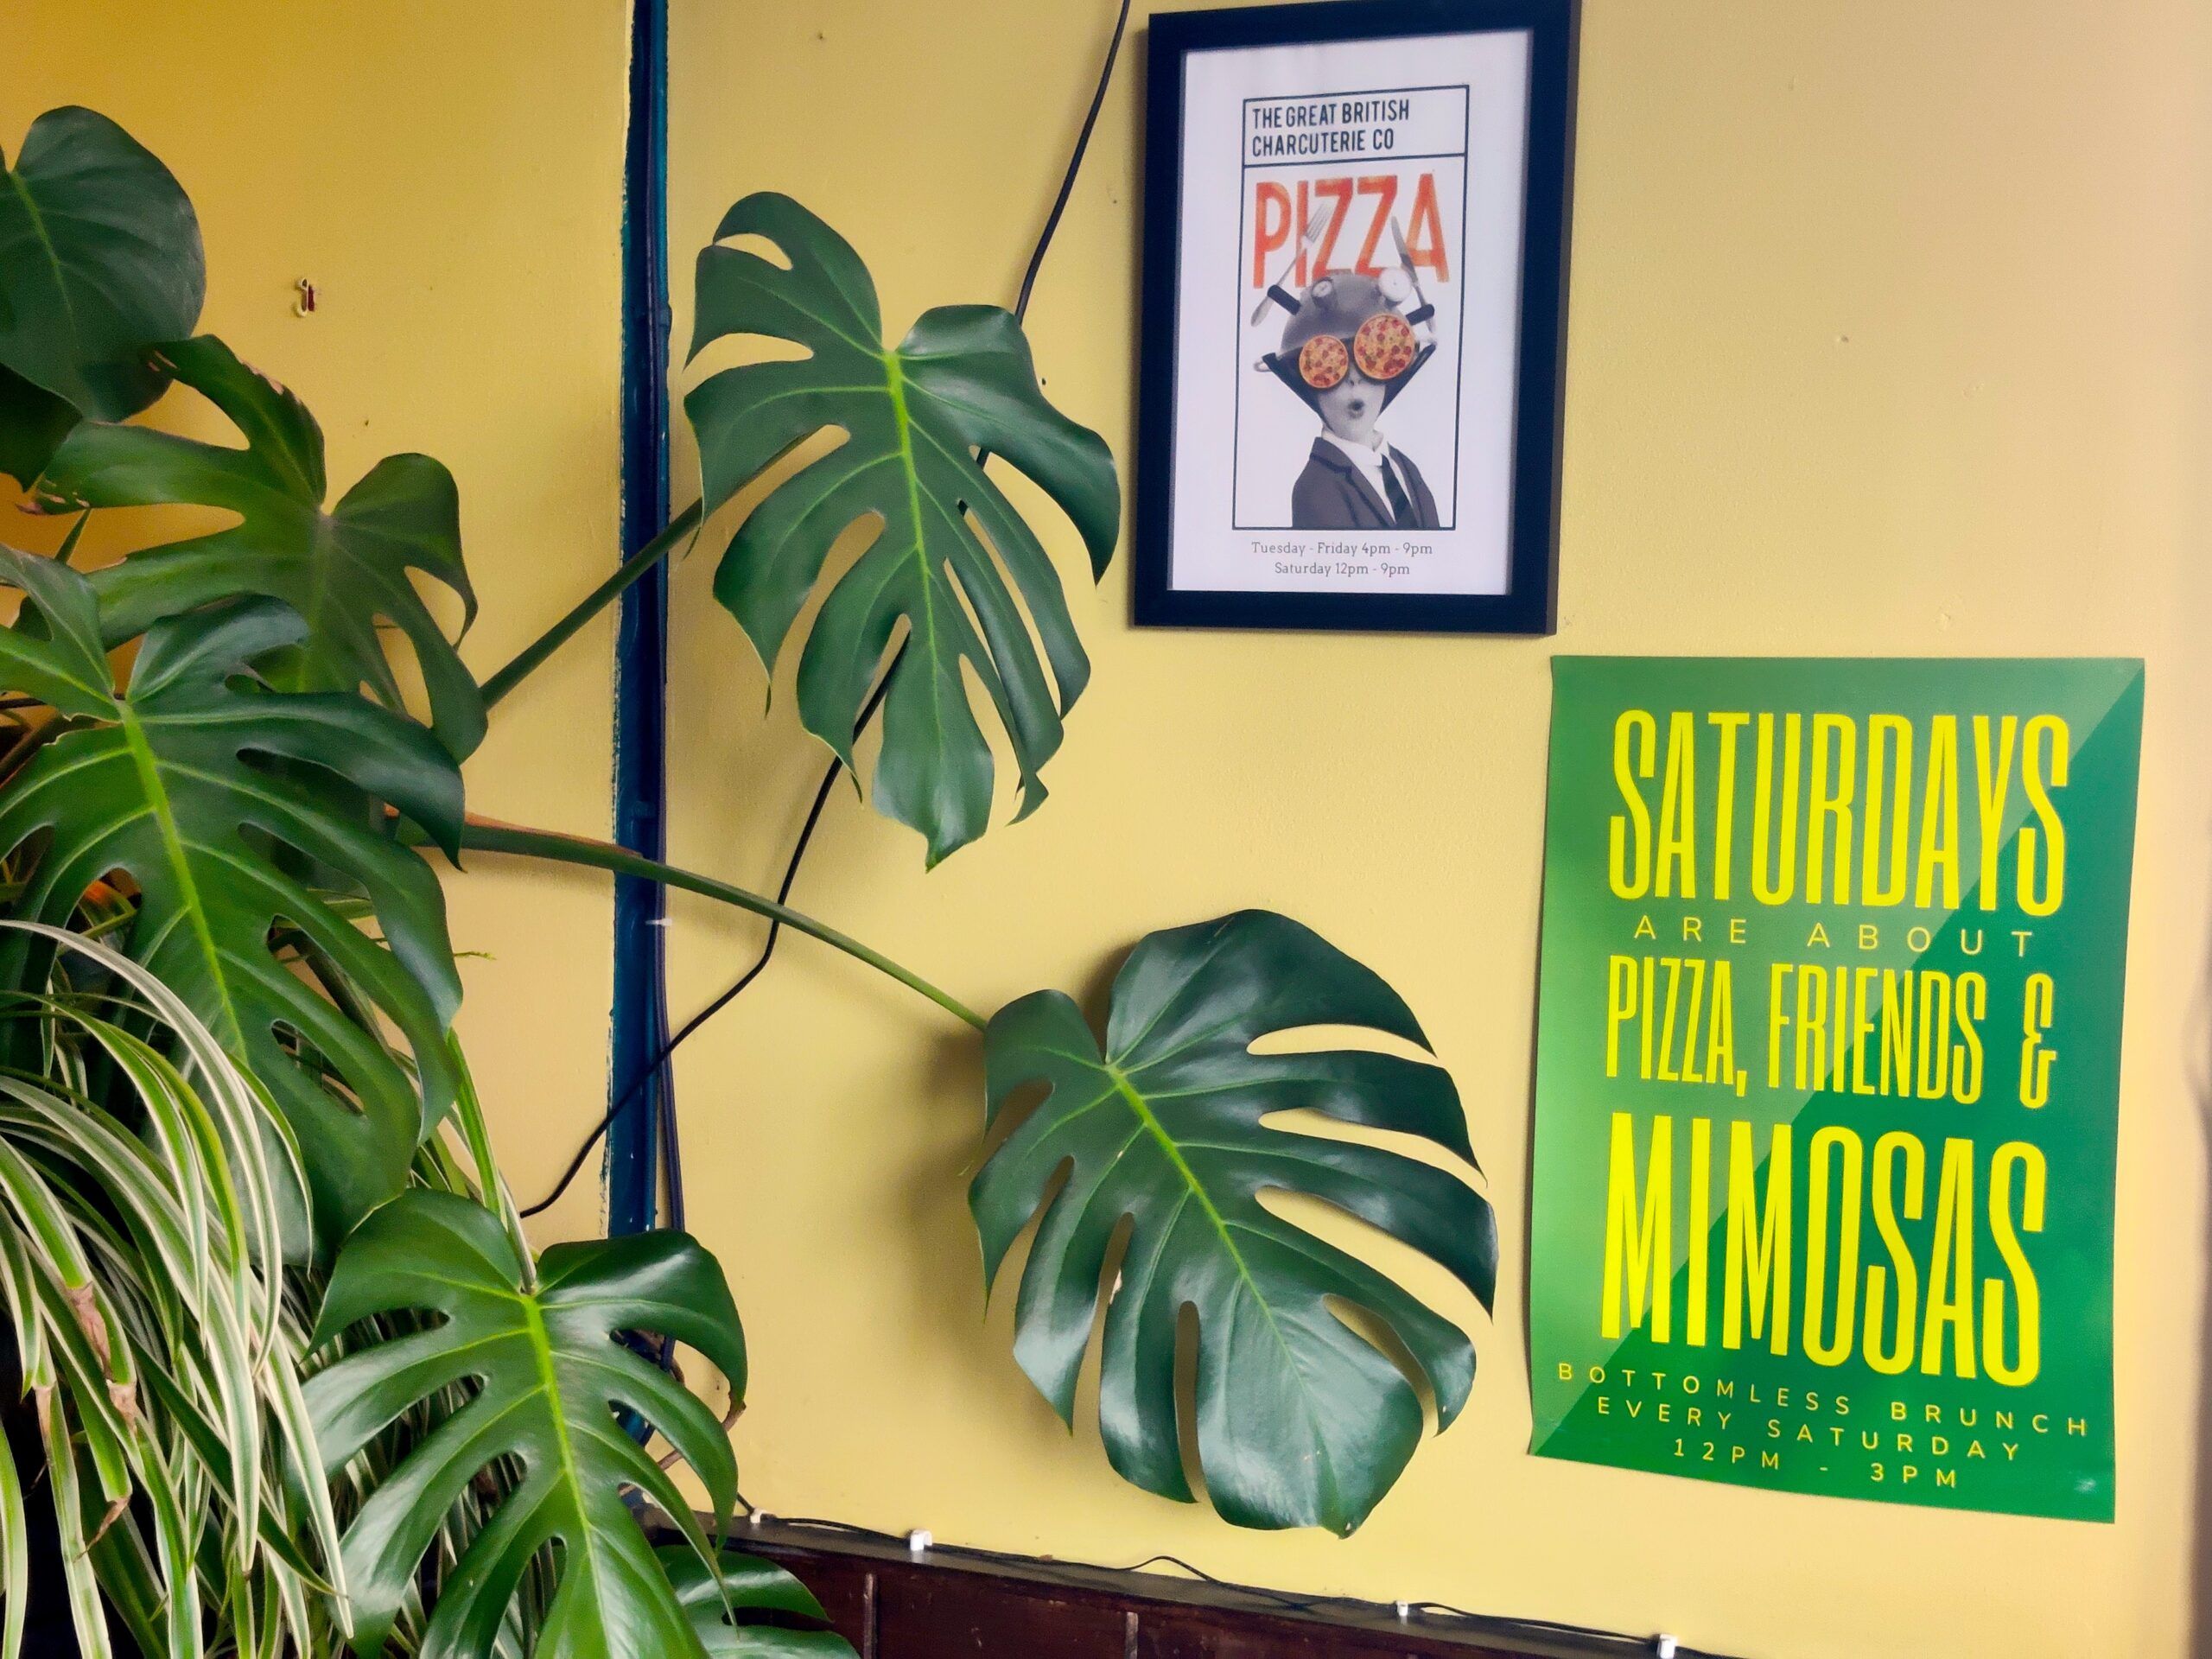 decorated walls at the West Hill Tavern, pictures and flyers on the yellow wall, big green plant